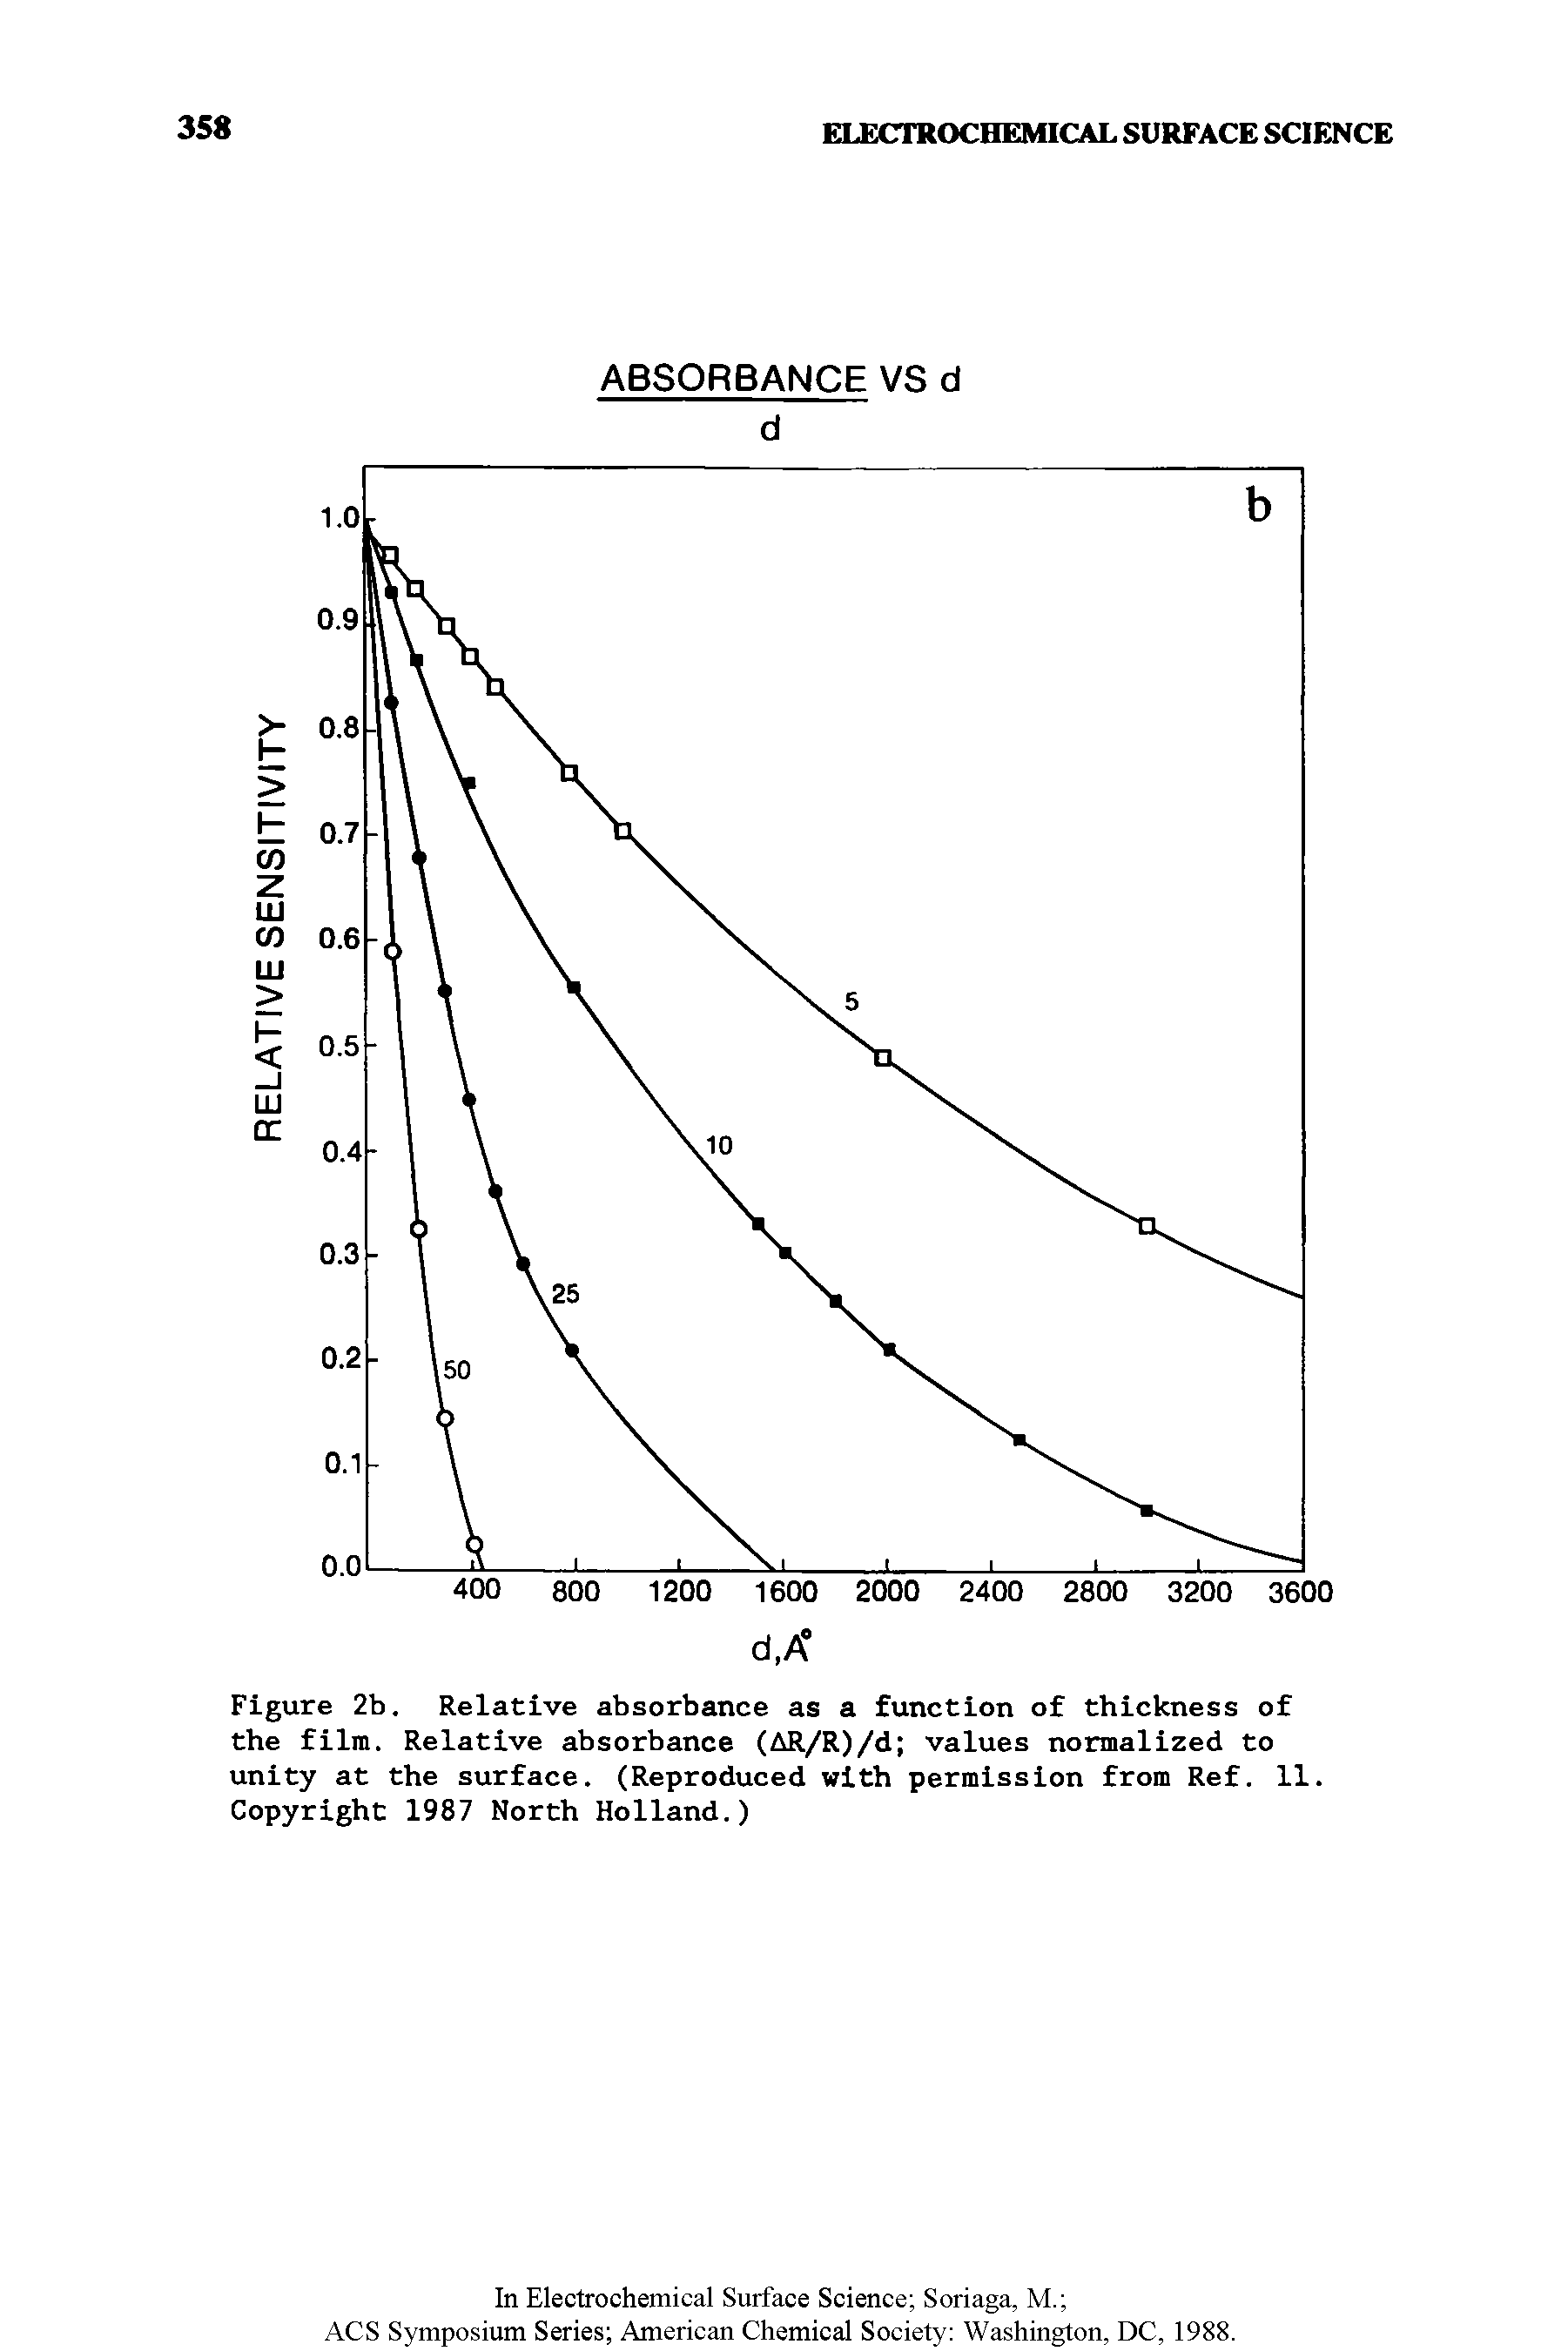 Figure 2b. Relative absorbance as a function of thickness of the film. Relative absorbance (AR/R)/d values normalized to unity at the surface. (Reproduced with permission from Ref. 11. Copyright 1987 North Holland.)...